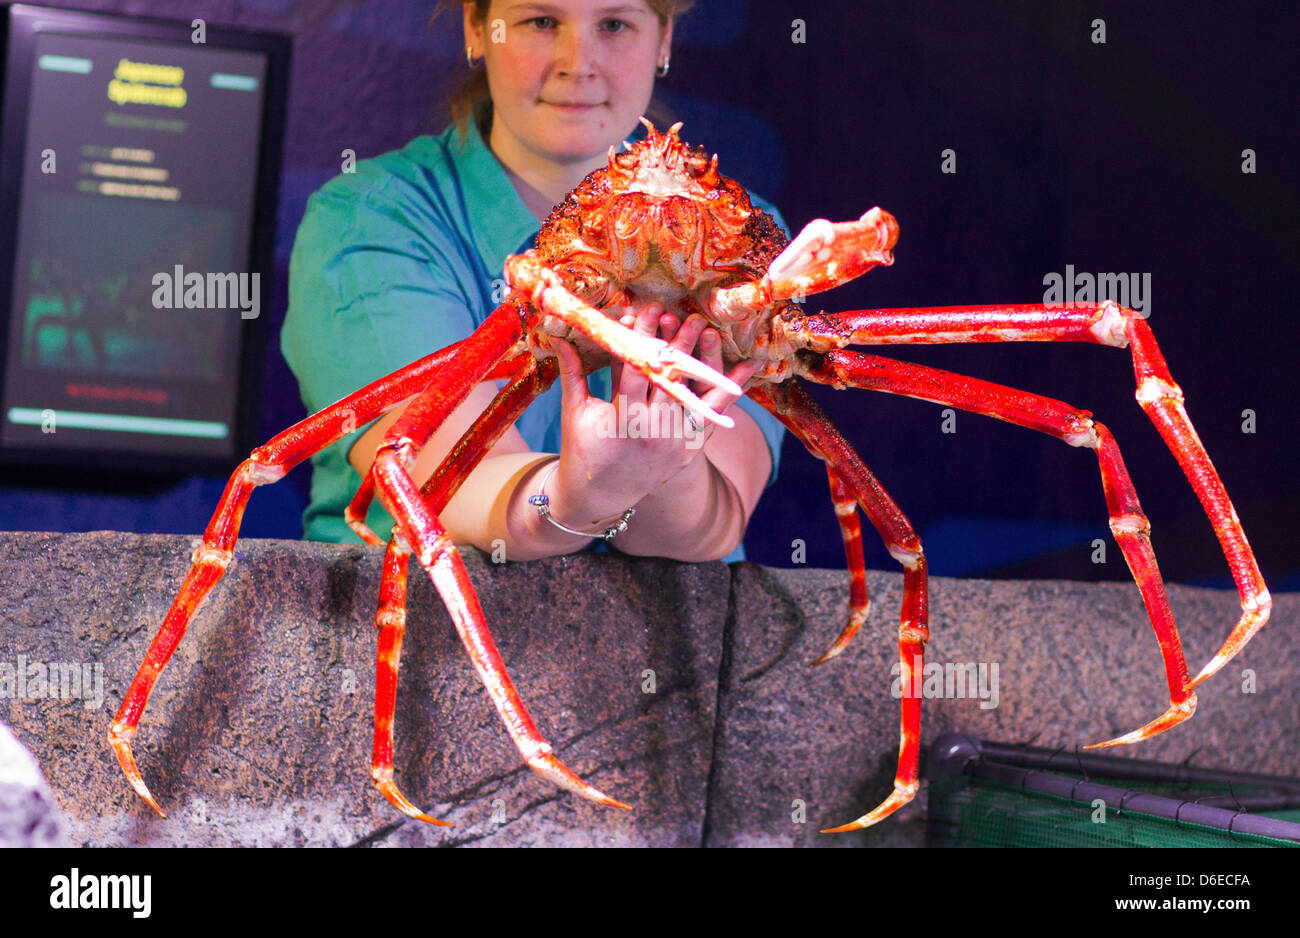 Biologist Cathrin Pawlak lifts a Japanese spider crab out of its tank at SeaLife Timmendorfer Strand in Timmendorfer Strand, Germany, 25 January 2012. The animals are measured and marked after they shed their skins. The underwaterworld SeaLife opened its doors 15 years ago and houses 2,500 animals in different aquariums with a combined volume of 500,000 litres. Photo: JENS BUETTNER Stock Photo